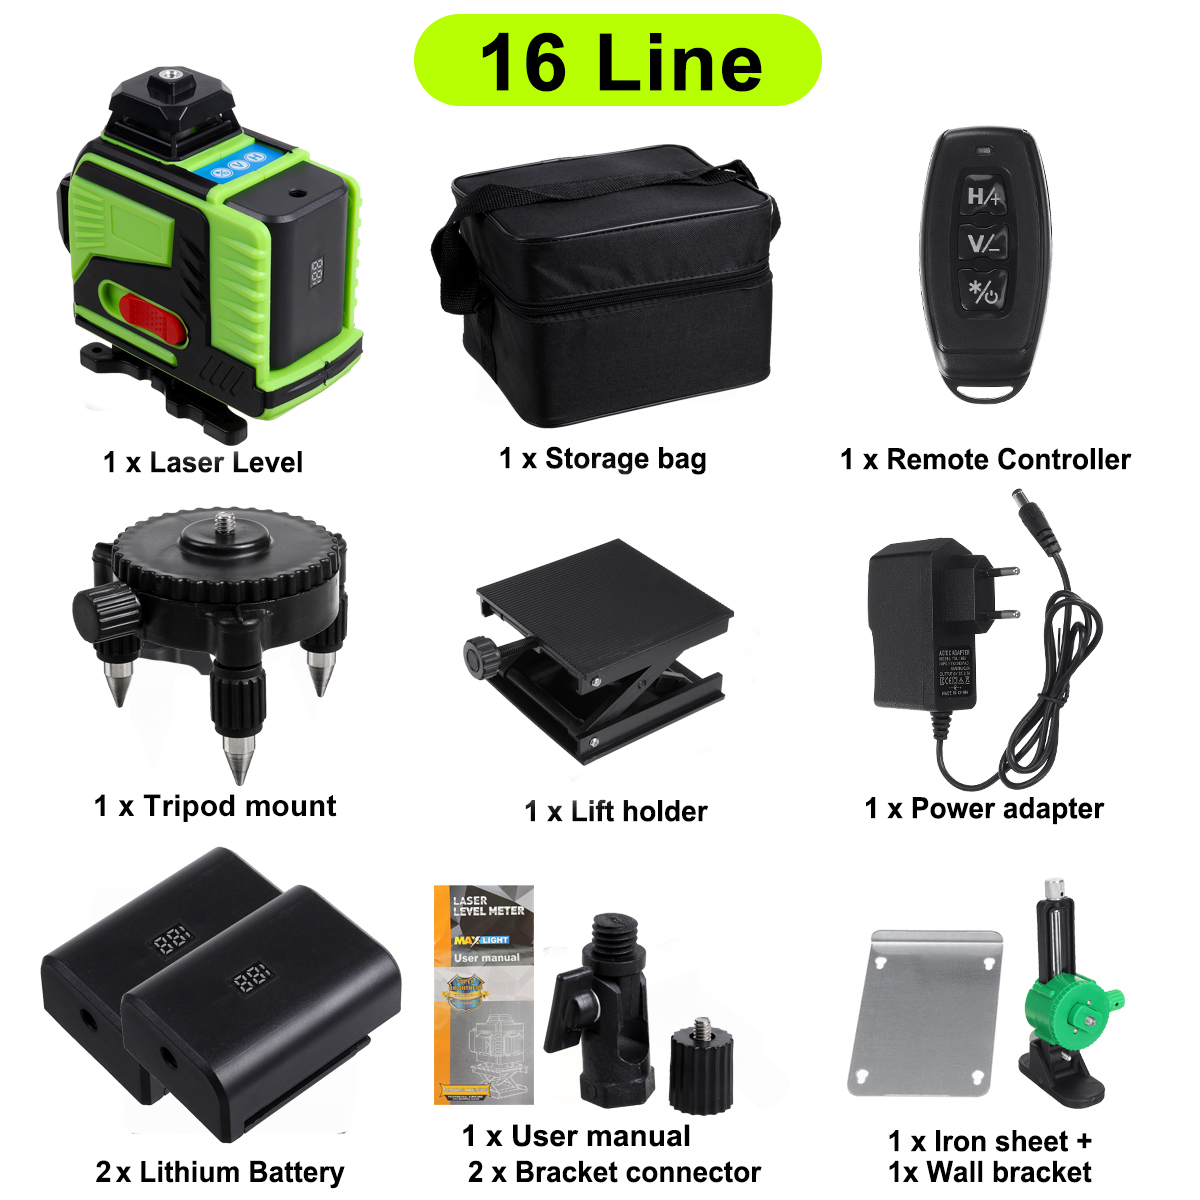 4D-16-Lines-Green-Light-Laser-Levels--360deg-Self-Rotary-Leveling-Measure-Tools-with-2PCS-Lithium-Ba-1941453-17